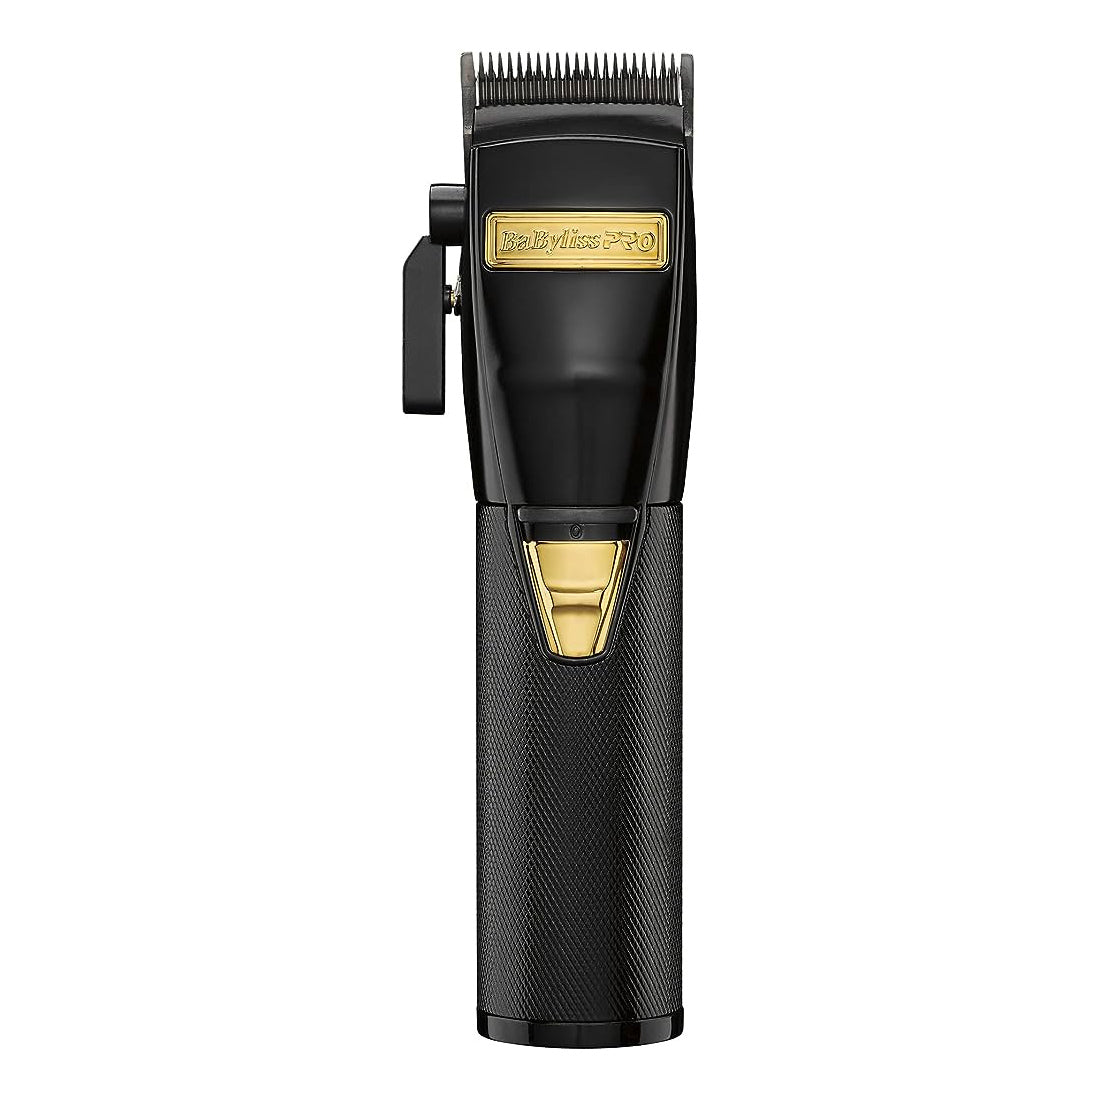 BaBylissPRO Black FX+ Cord or Cordless Clippers